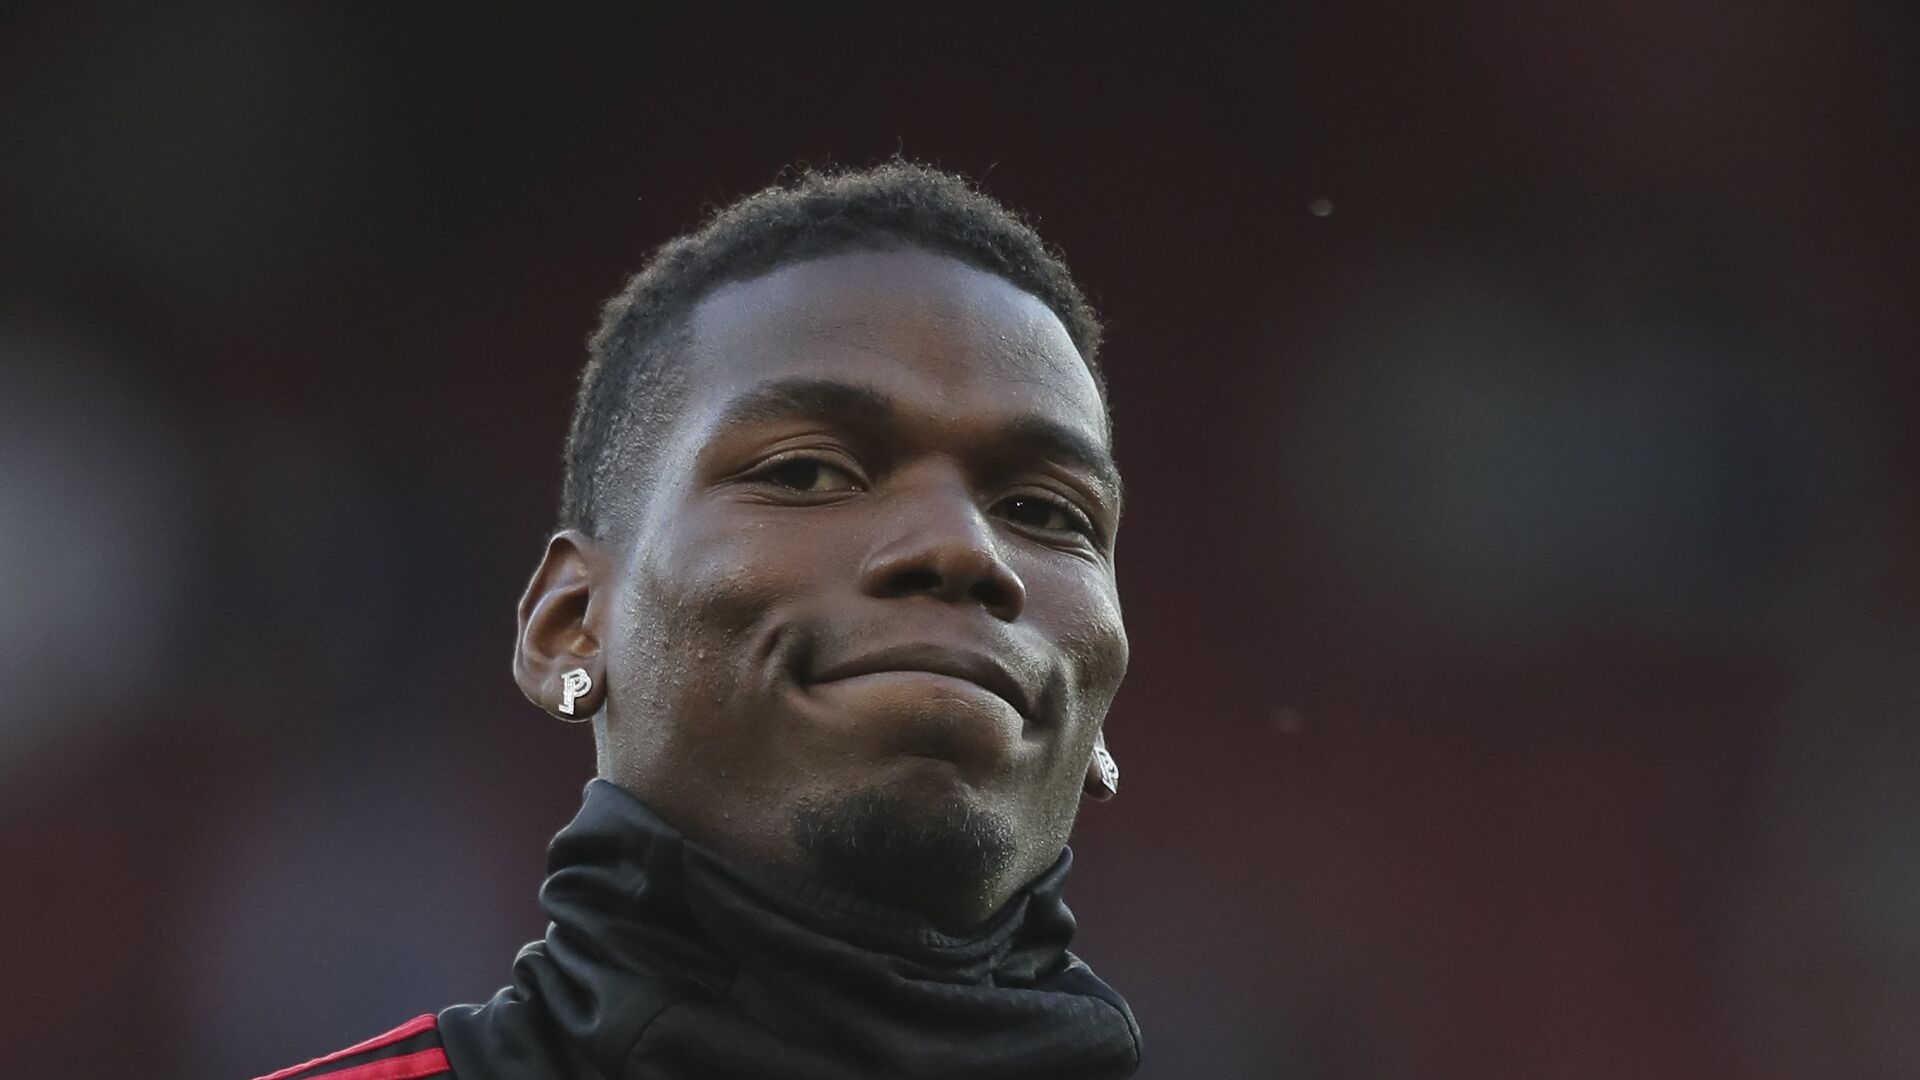 Manchester United's Paul Pogba applauds the fans as he takes part in the warm up prior to the start of the English Premier League soccer match between Manchester United and Leicester City at Old Trafford, in Manchester, England, Friday, Aug. 10, 2018 - اسپوتنیک افغانستان  , 1920, 08.07.2022